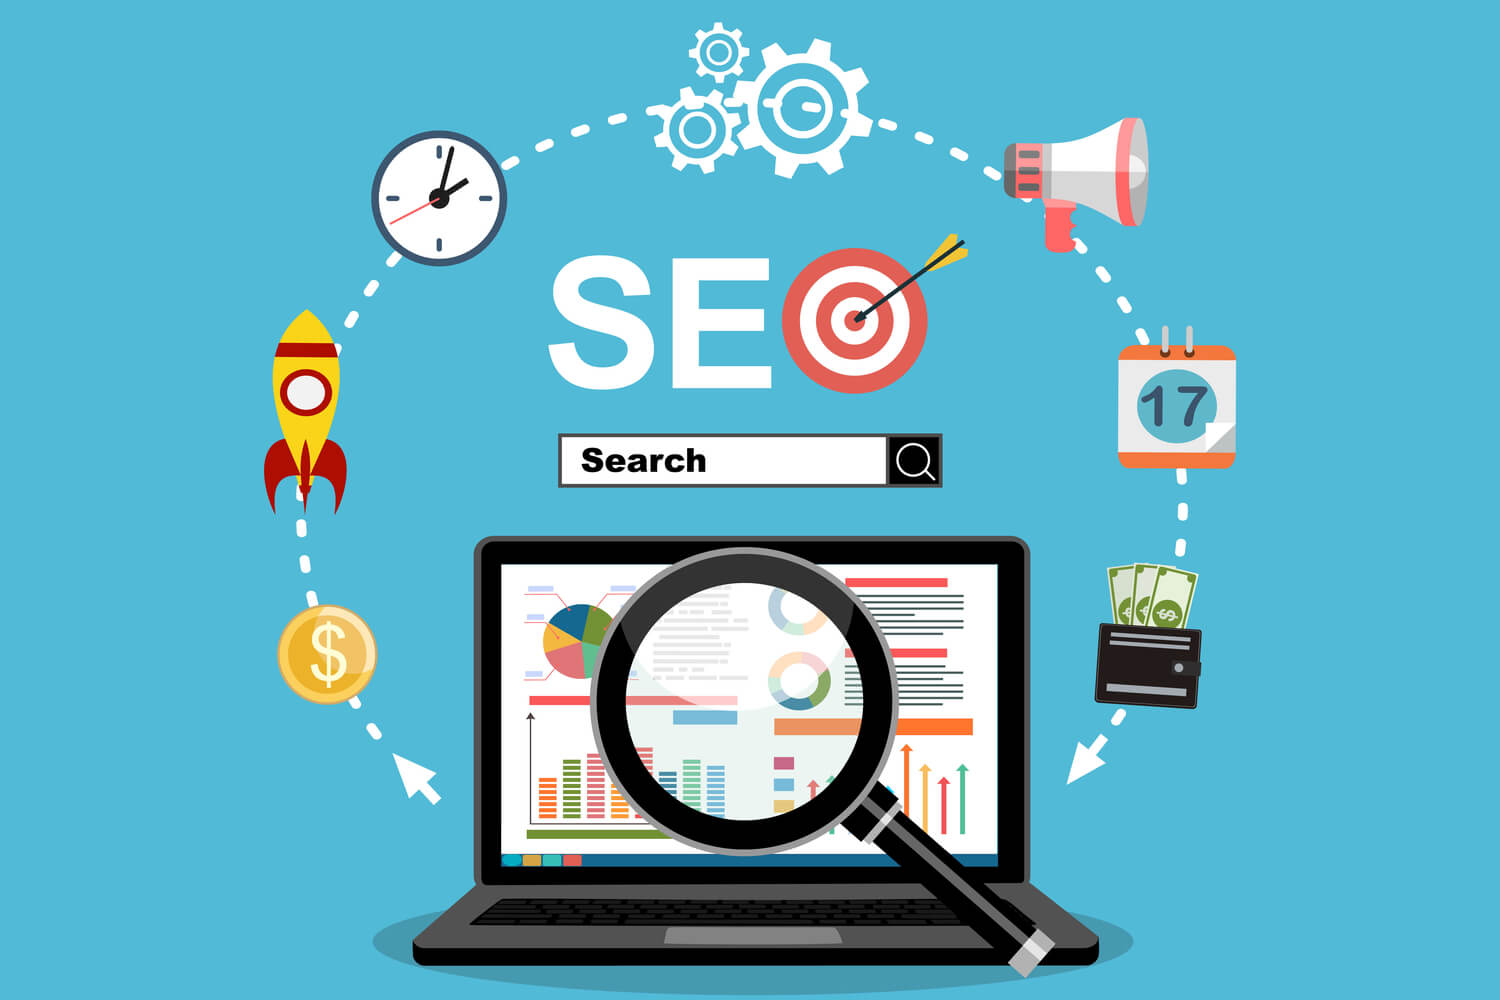 Can you do SEO yourself